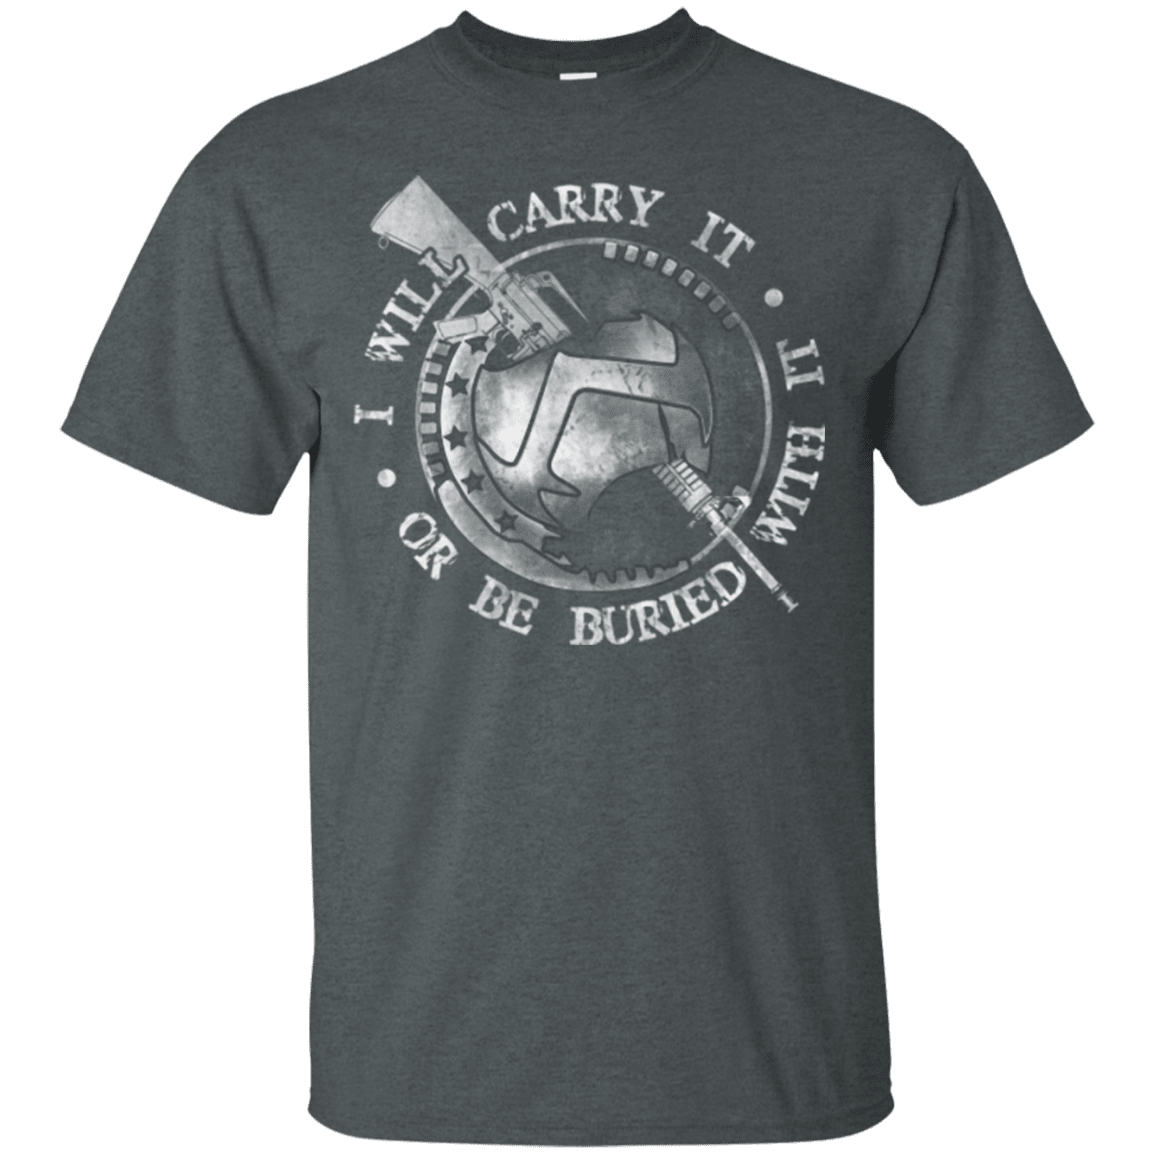 Military T-Shirt "I WILL CARRY IT OR BE BURIED WITH IT"-TShirt-General-Veterans Nation